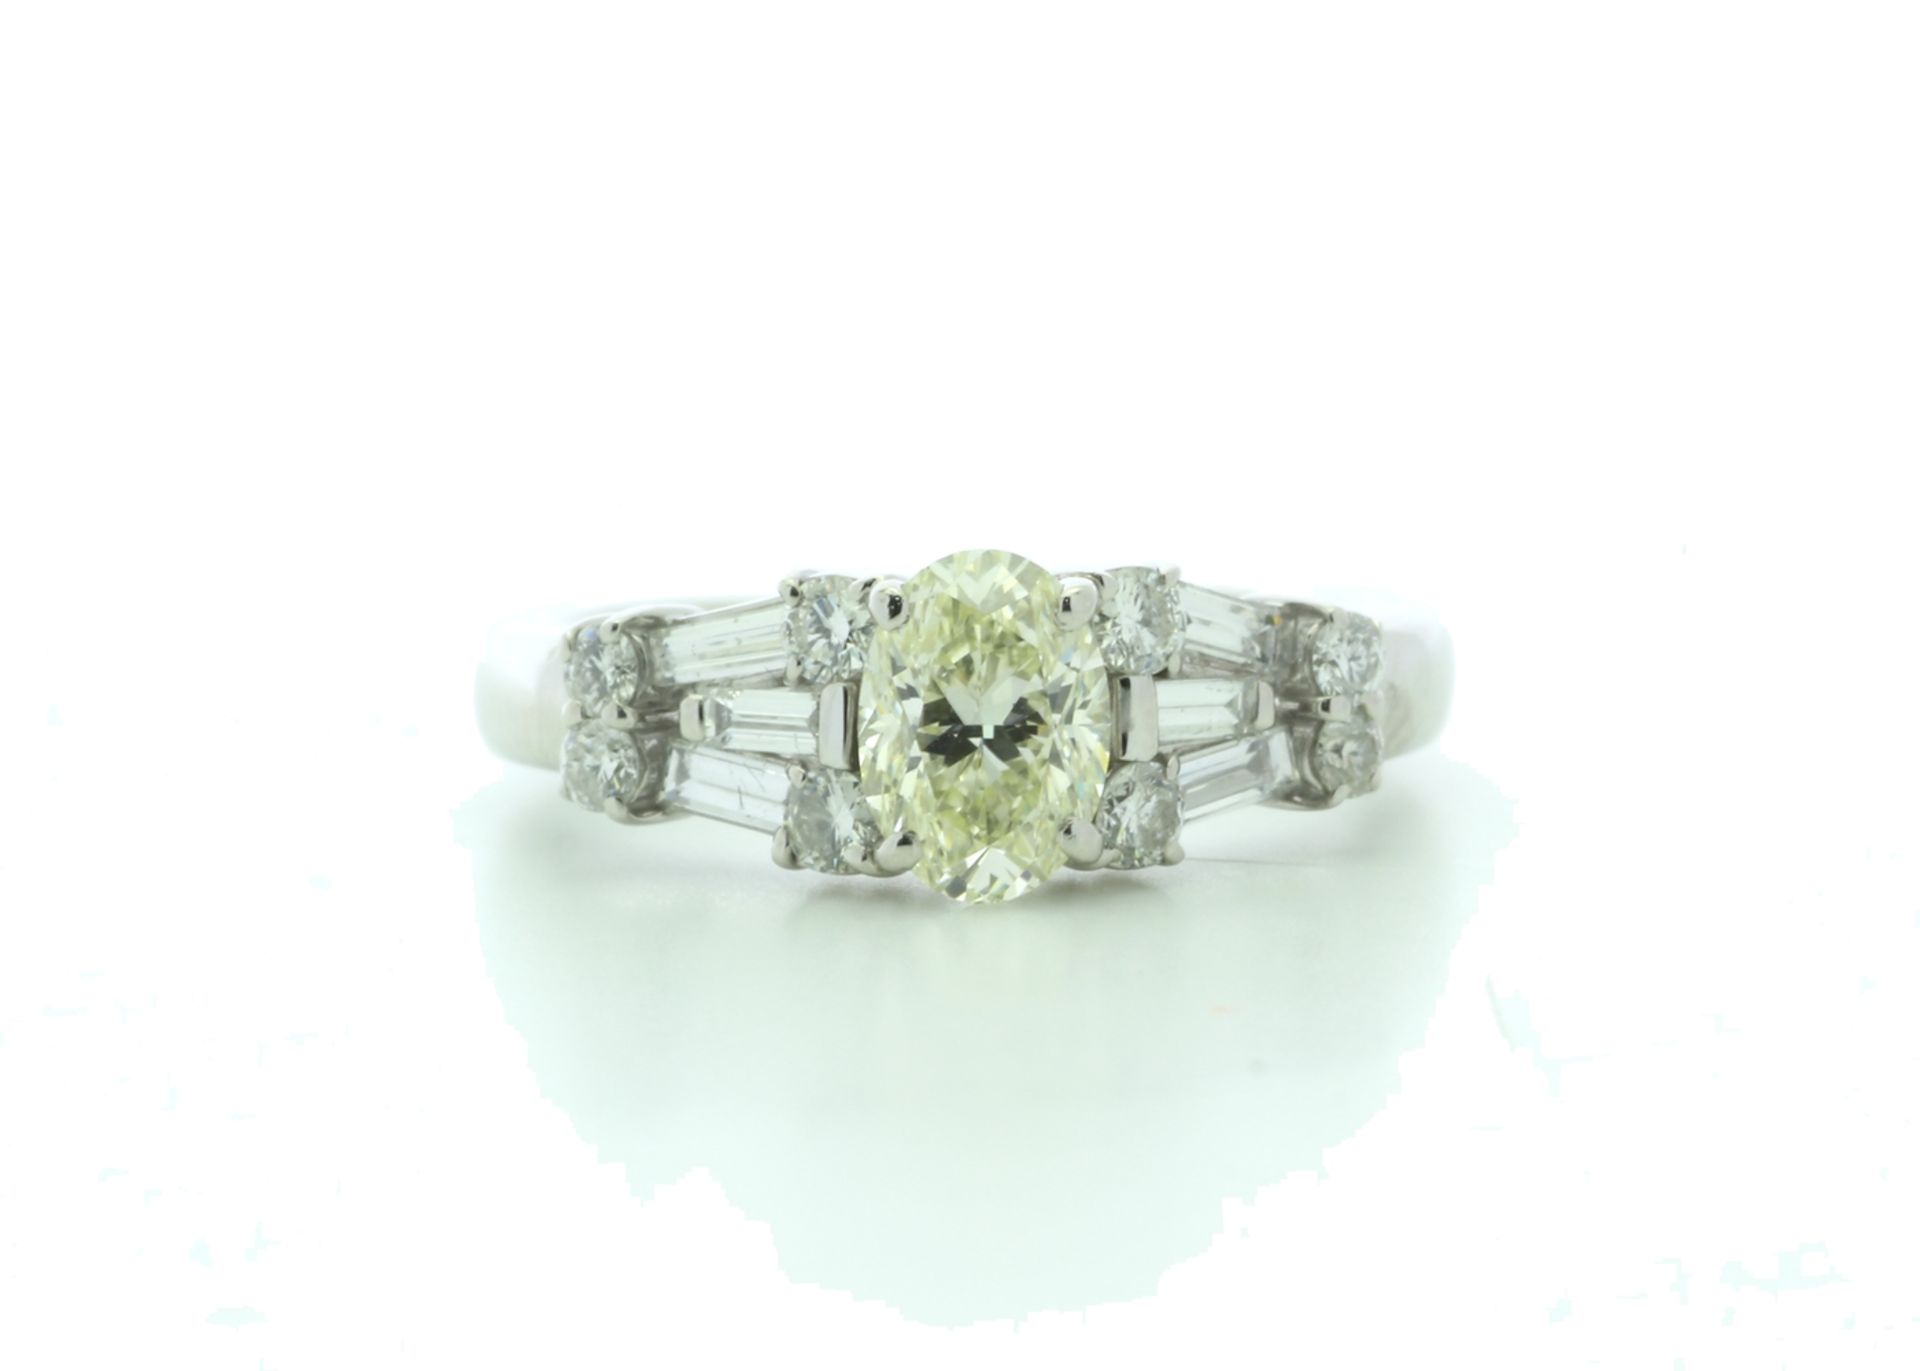 Platinum Oval Diamond Ring (0.70) 1.13 Carats - Valued by IDI £13,500.00 - One stunning natural oval